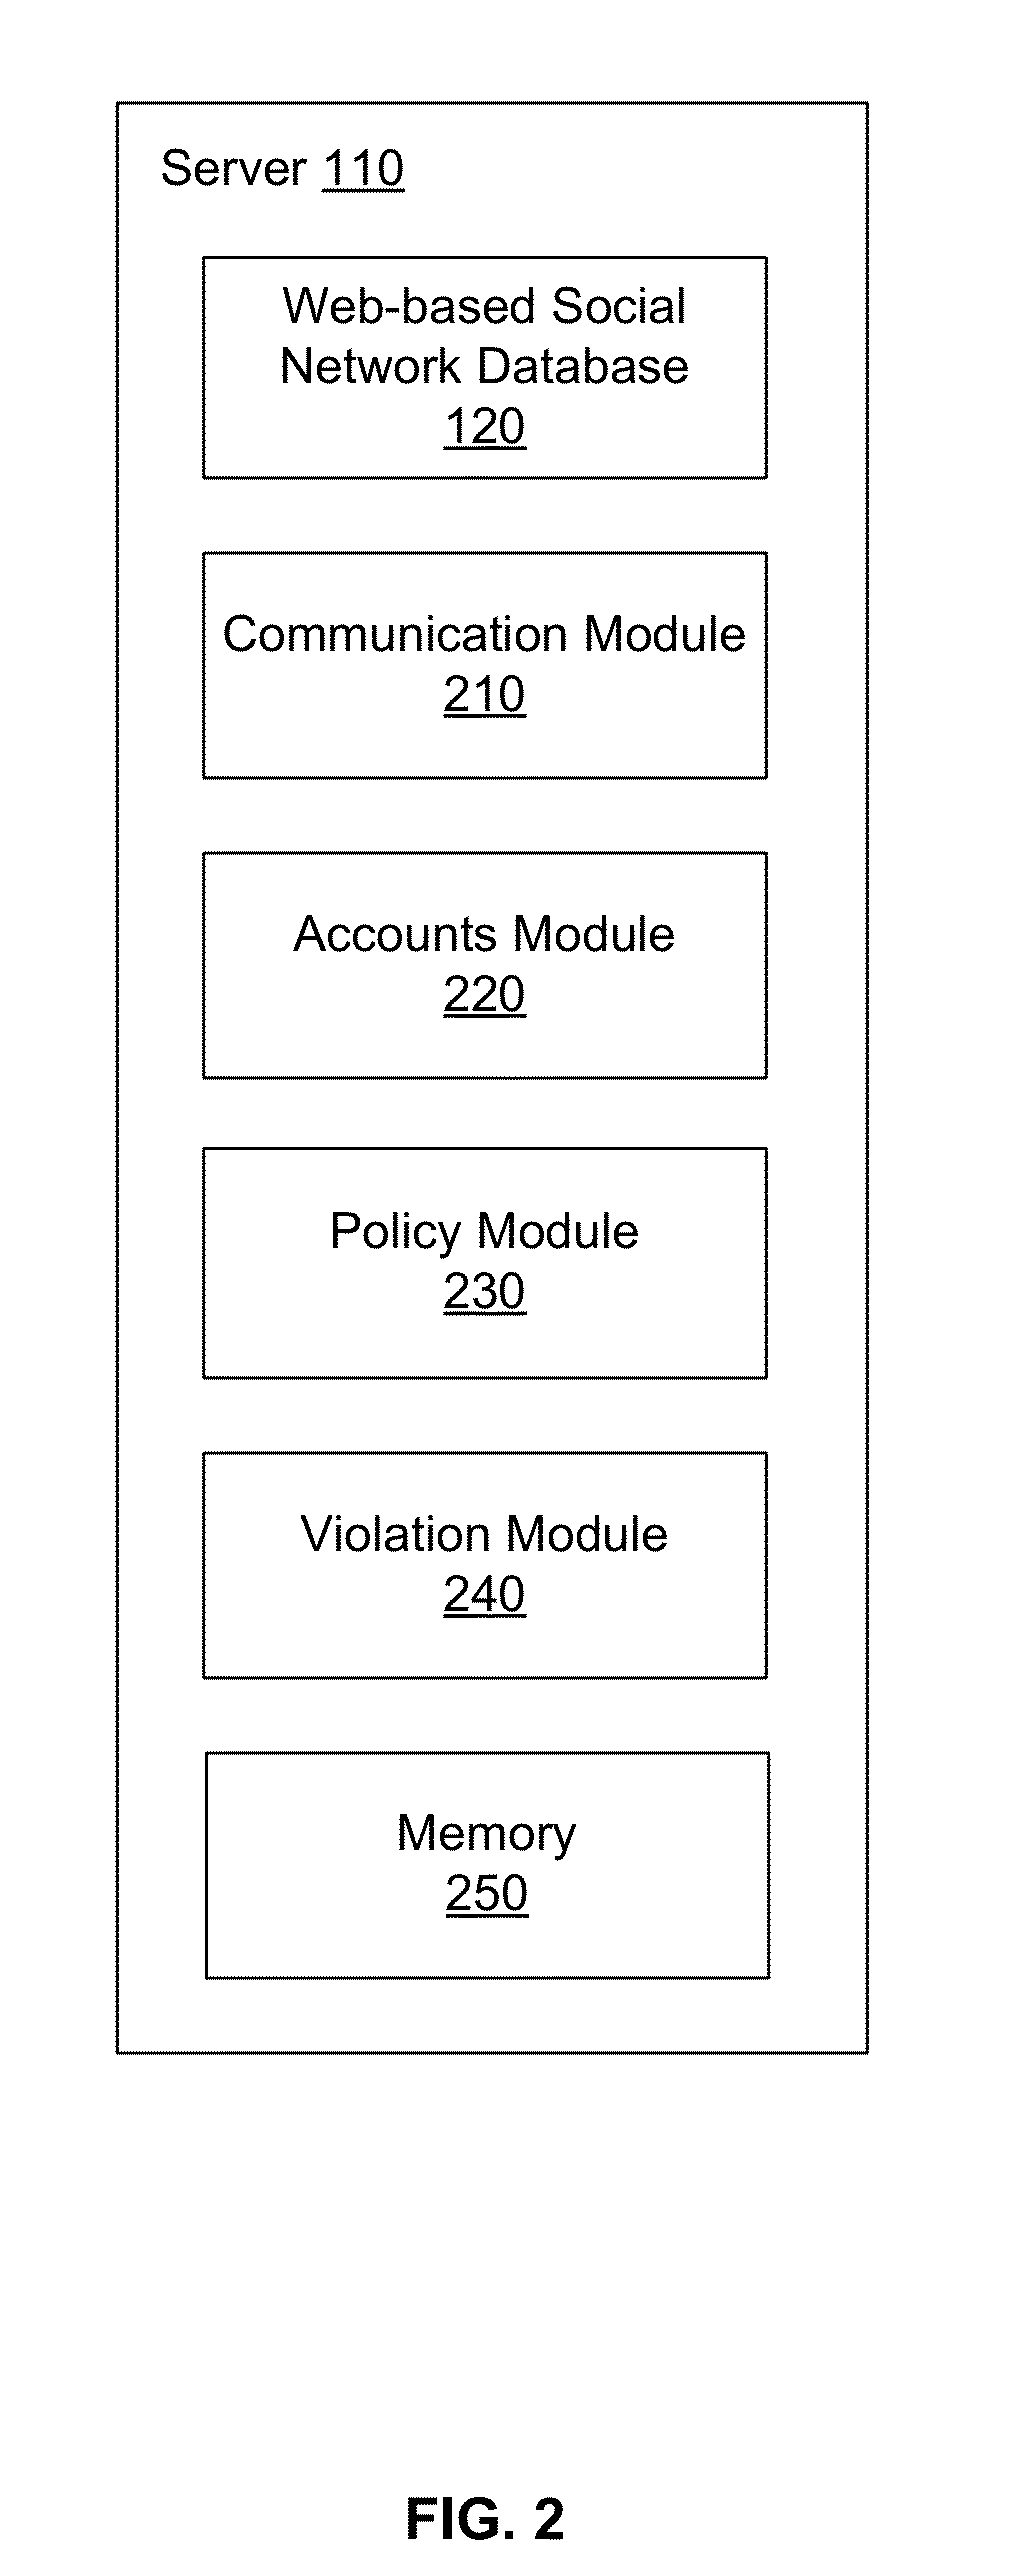 Automatically Managing Objectionable Behavior In A Web-Based Social Network